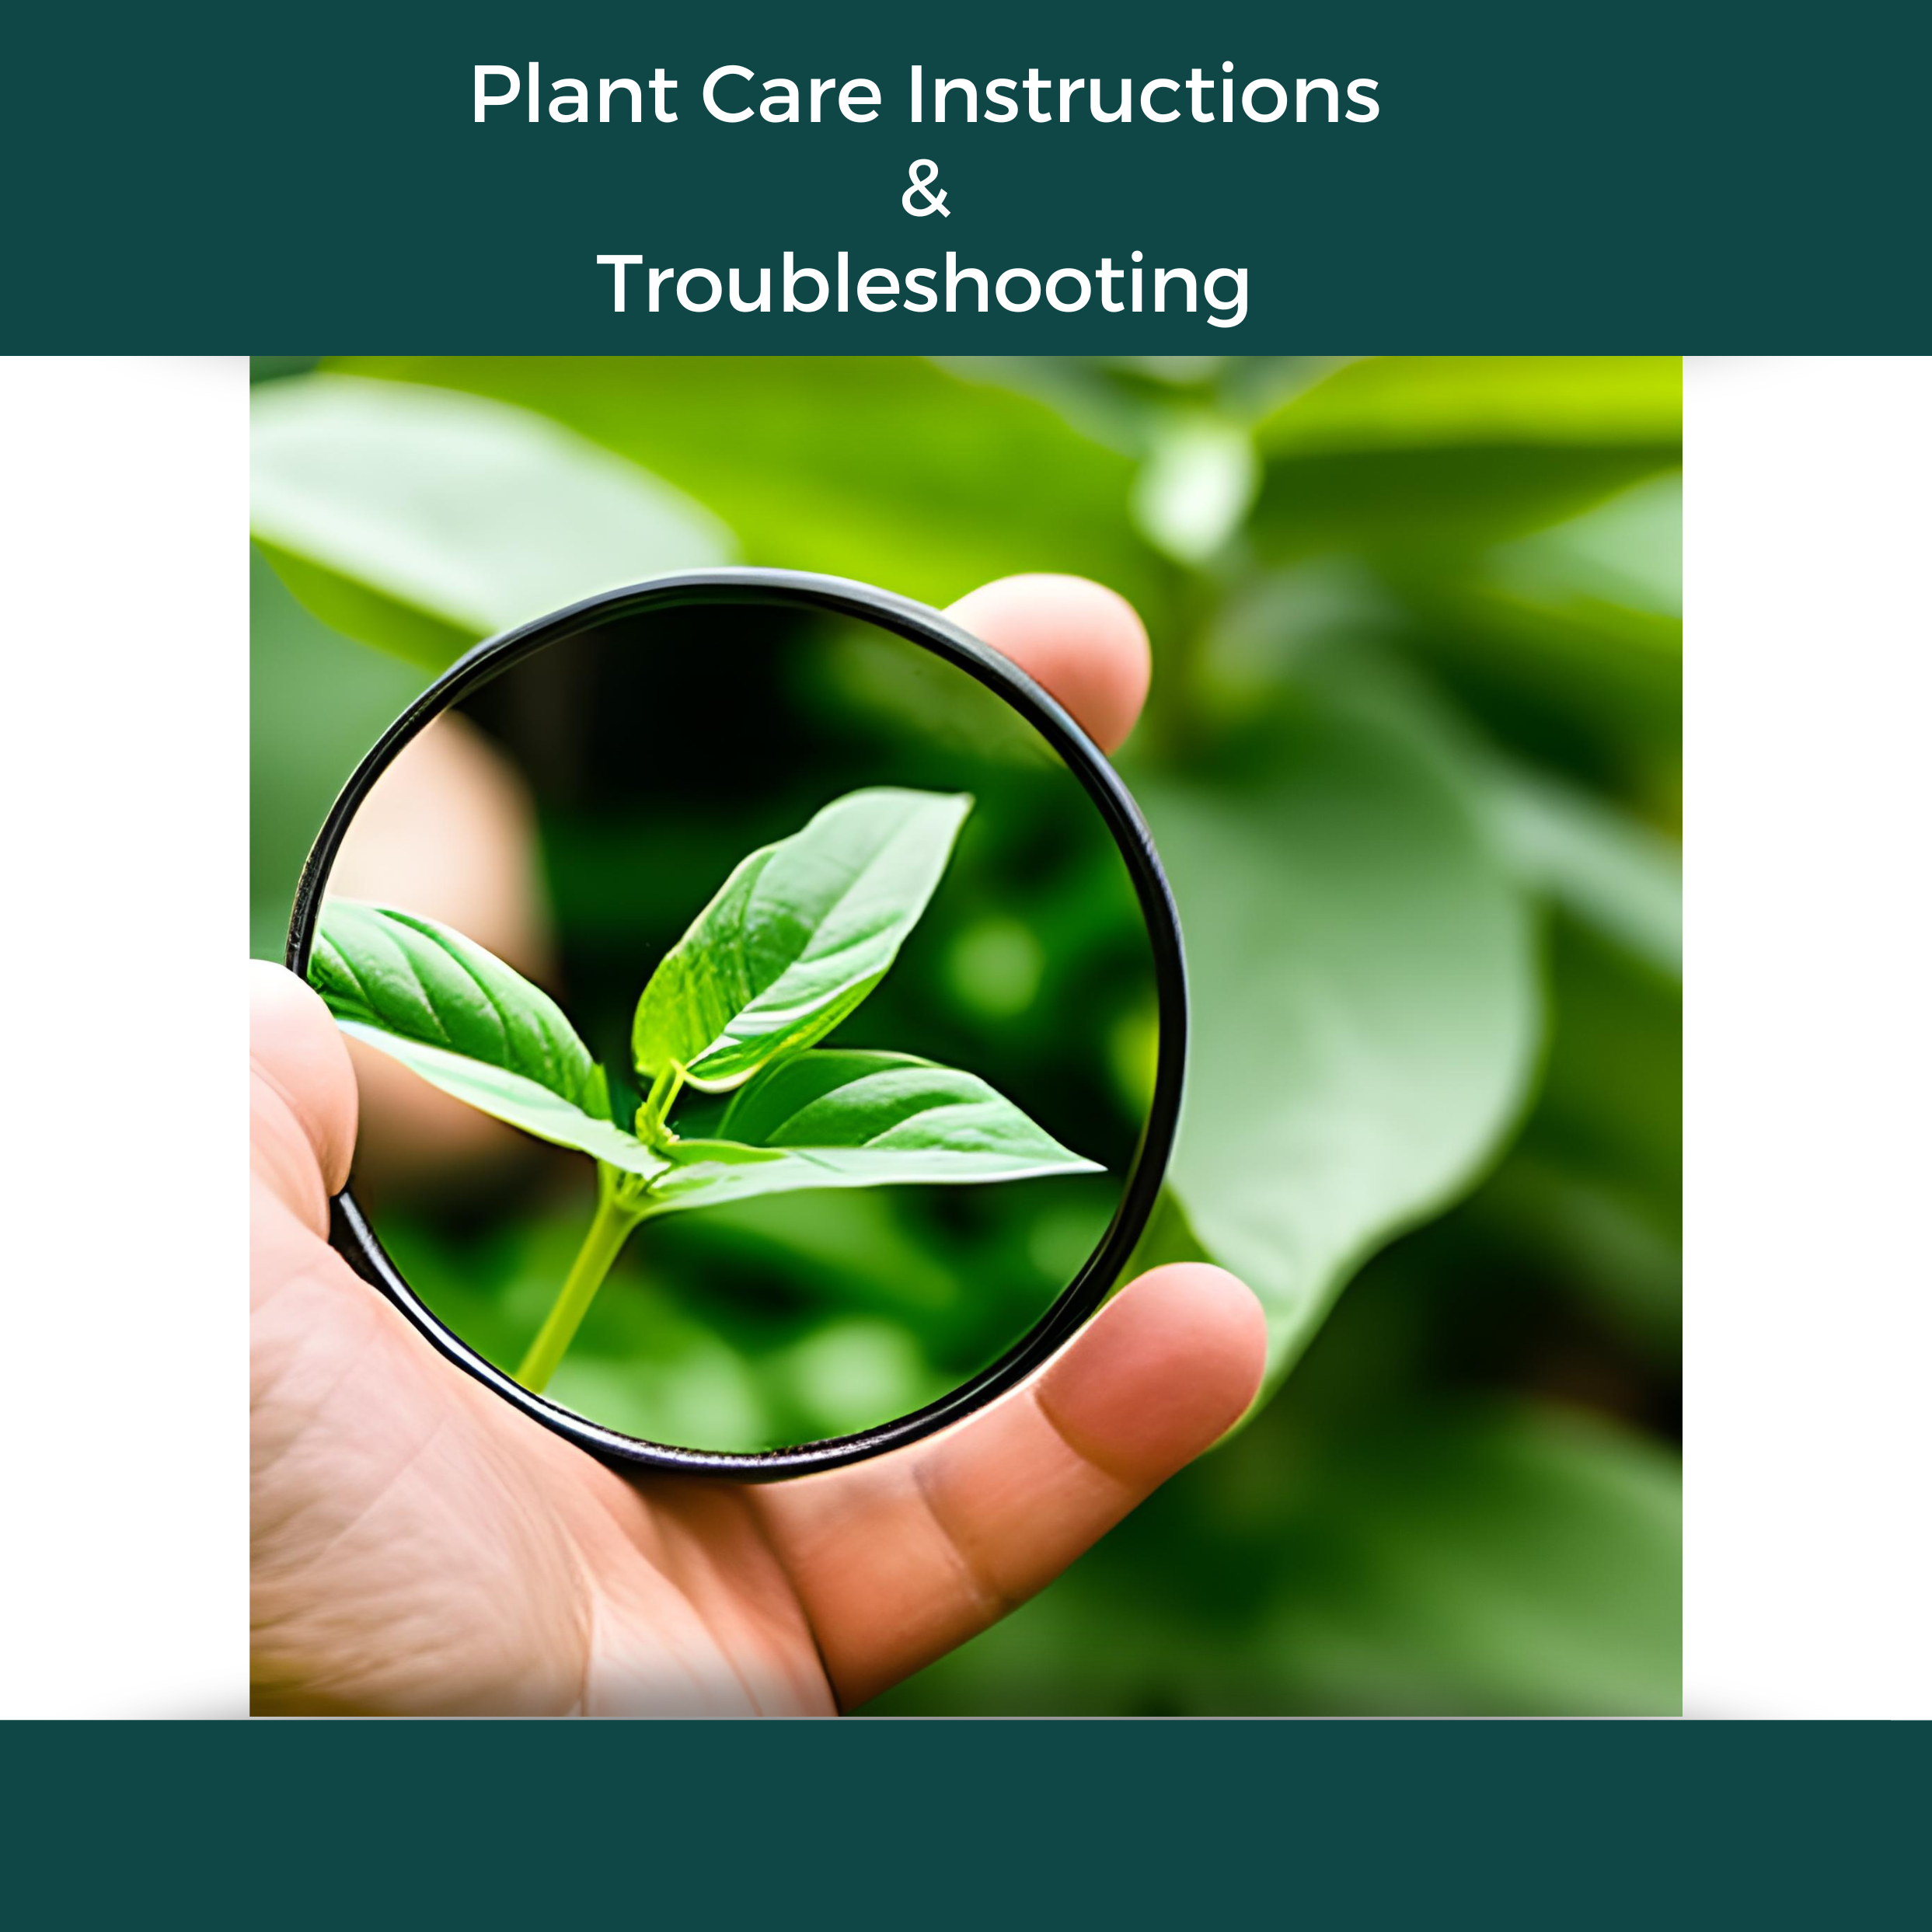 Plant Care Problems and Instructions